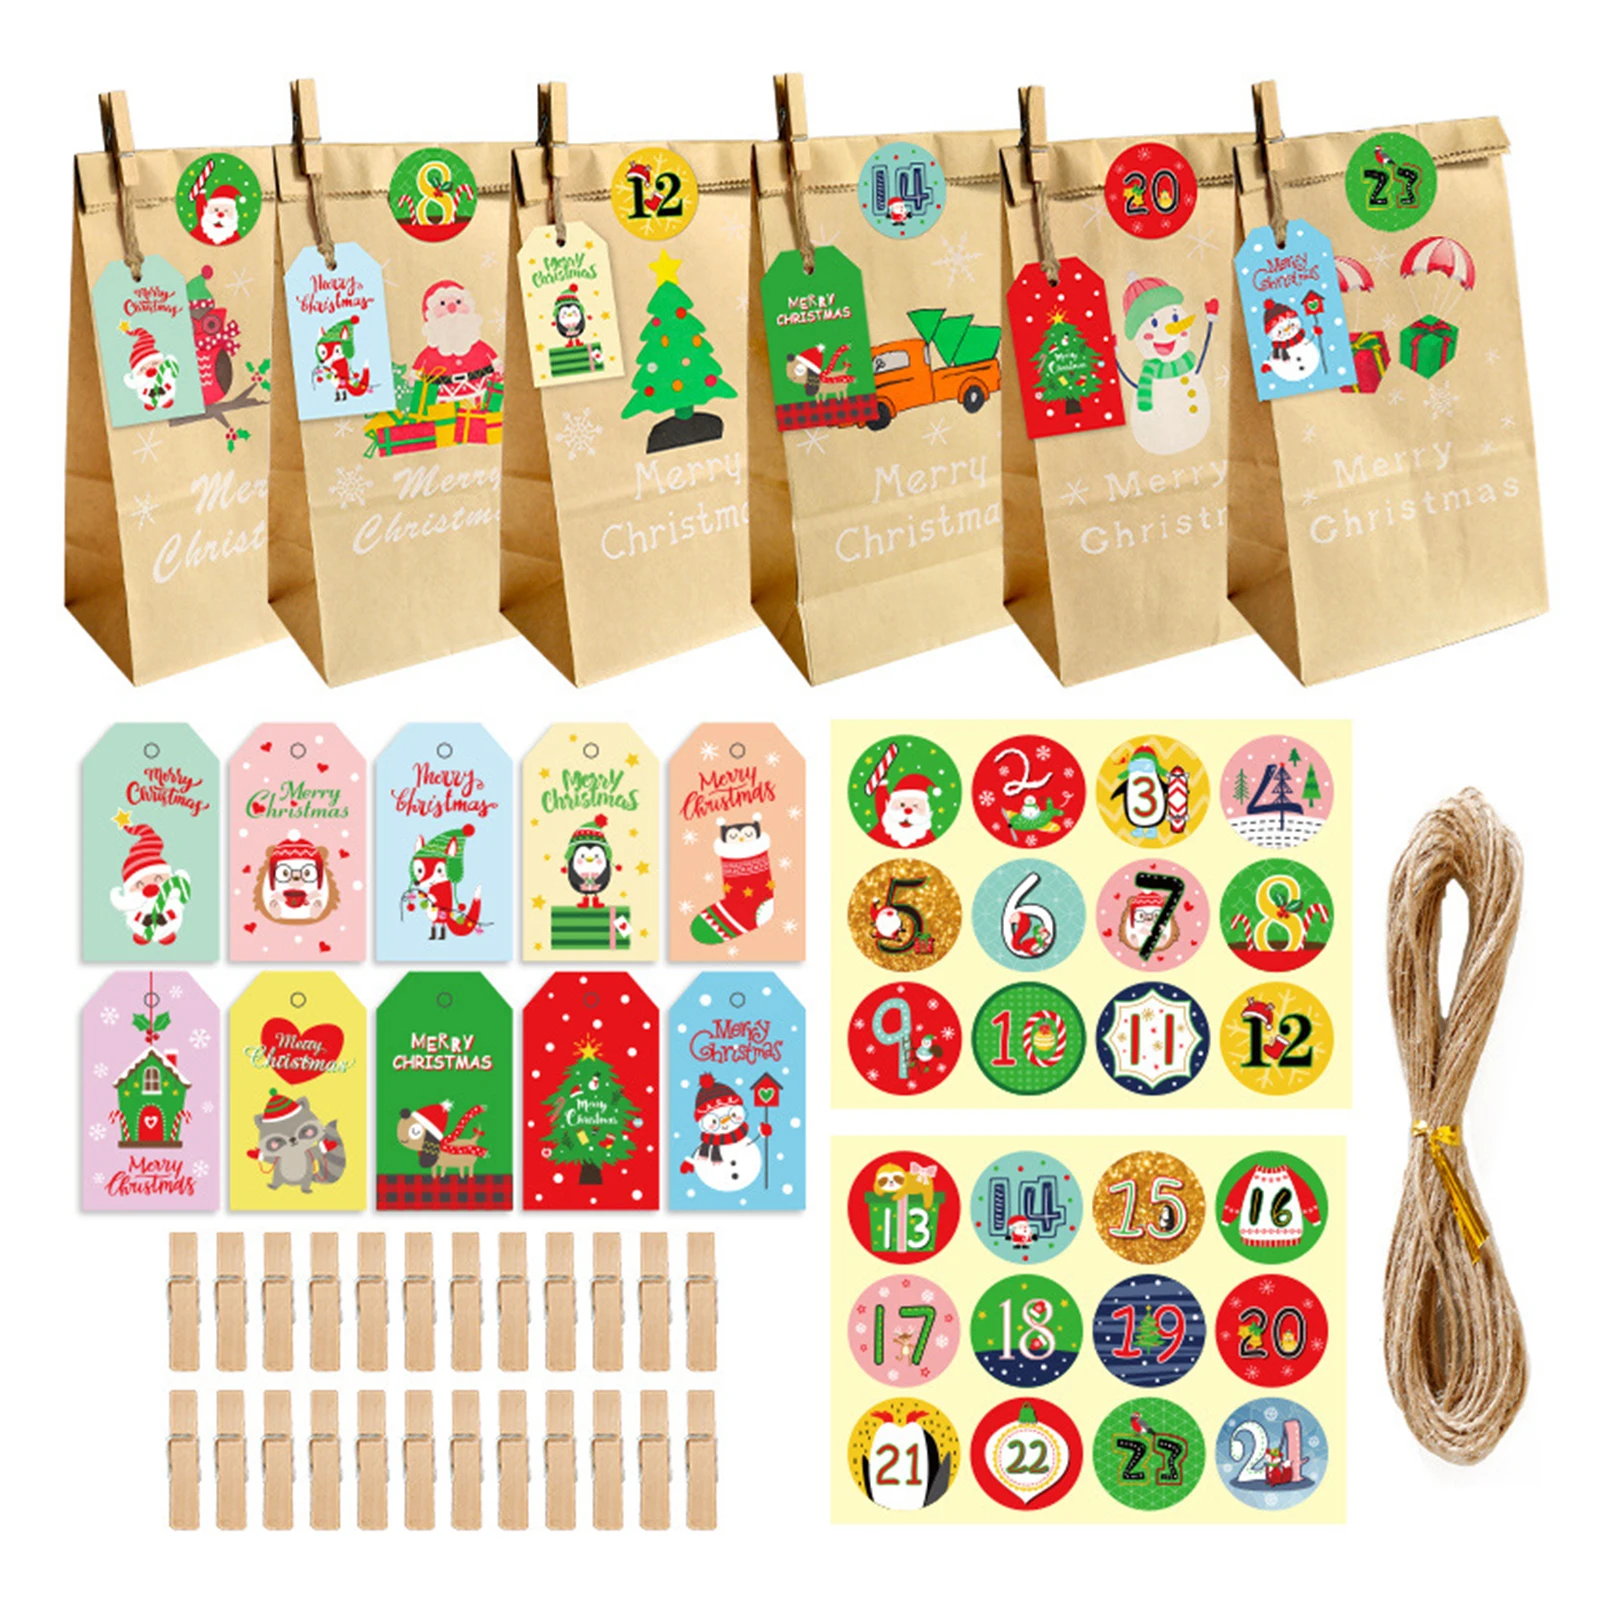 

24PCS Christmas Gift Bags Kraft Boutique Wrapping Paper Bags Clips Number Sticker design with Snowman Santa Claus Elk